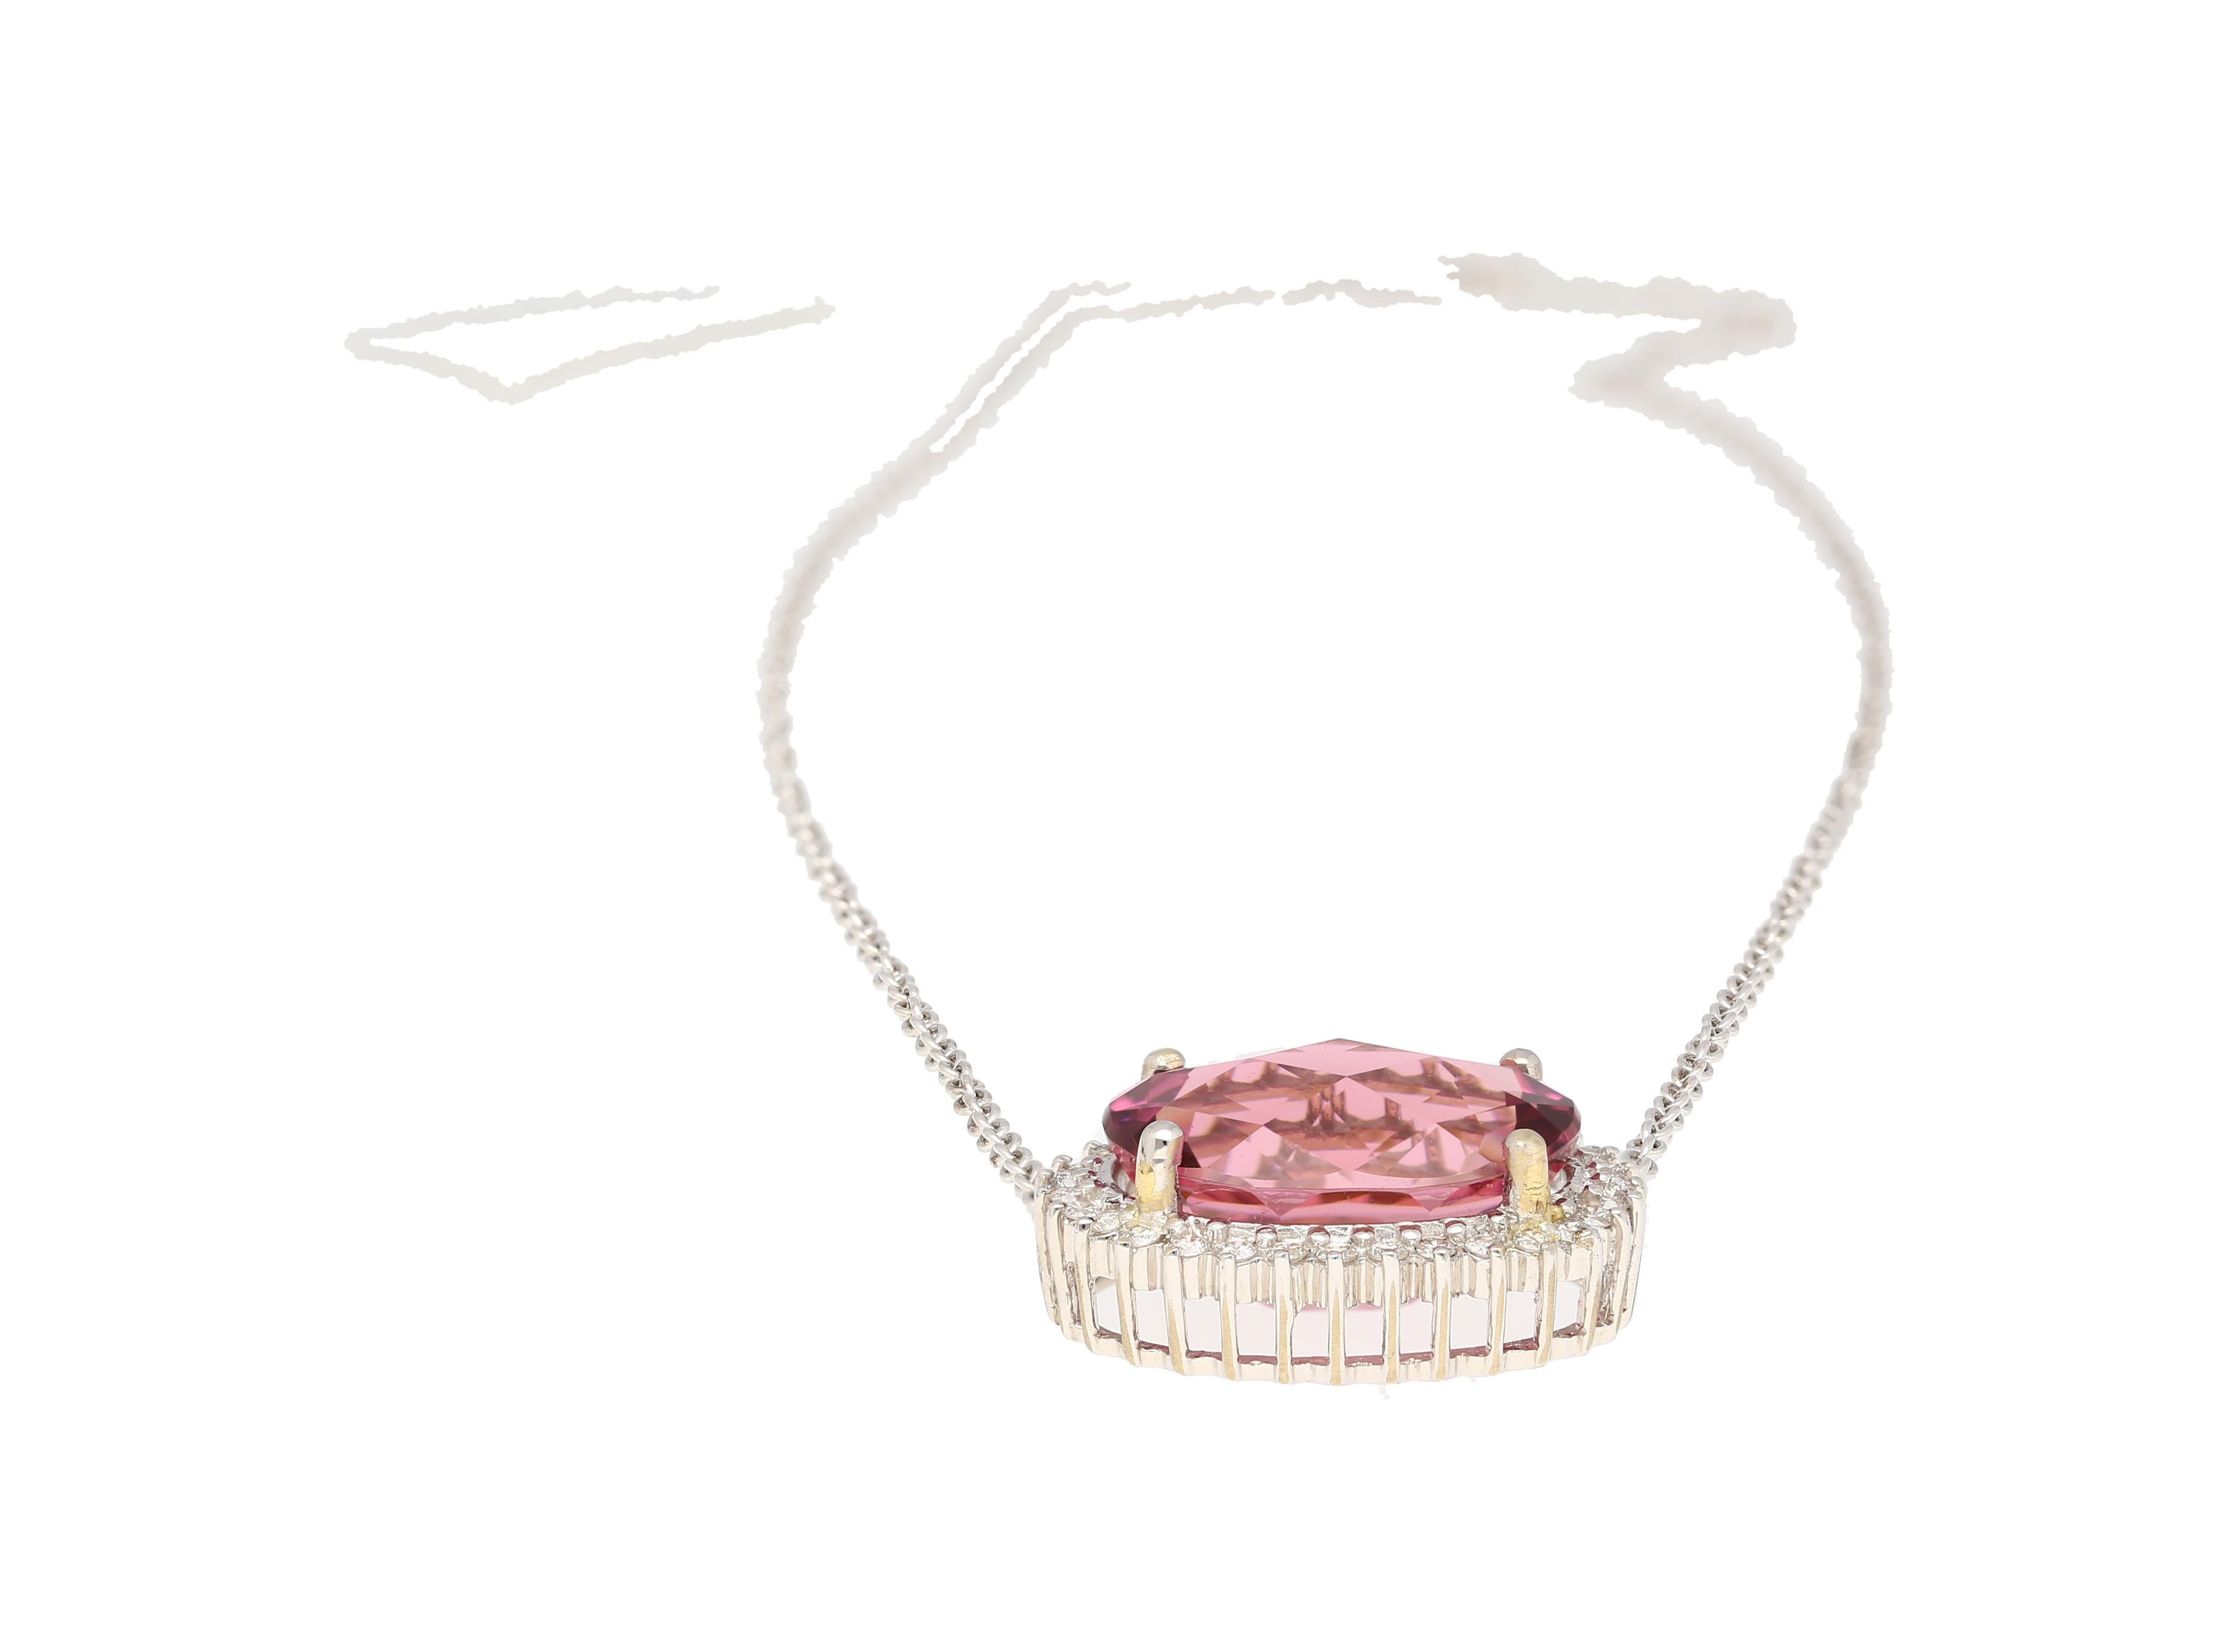 21.13 Carat Pink Tourmaline & Diamond Floating Pendant Necklace in 14K/18K Gold In New Condition For Sale In Miami, FL